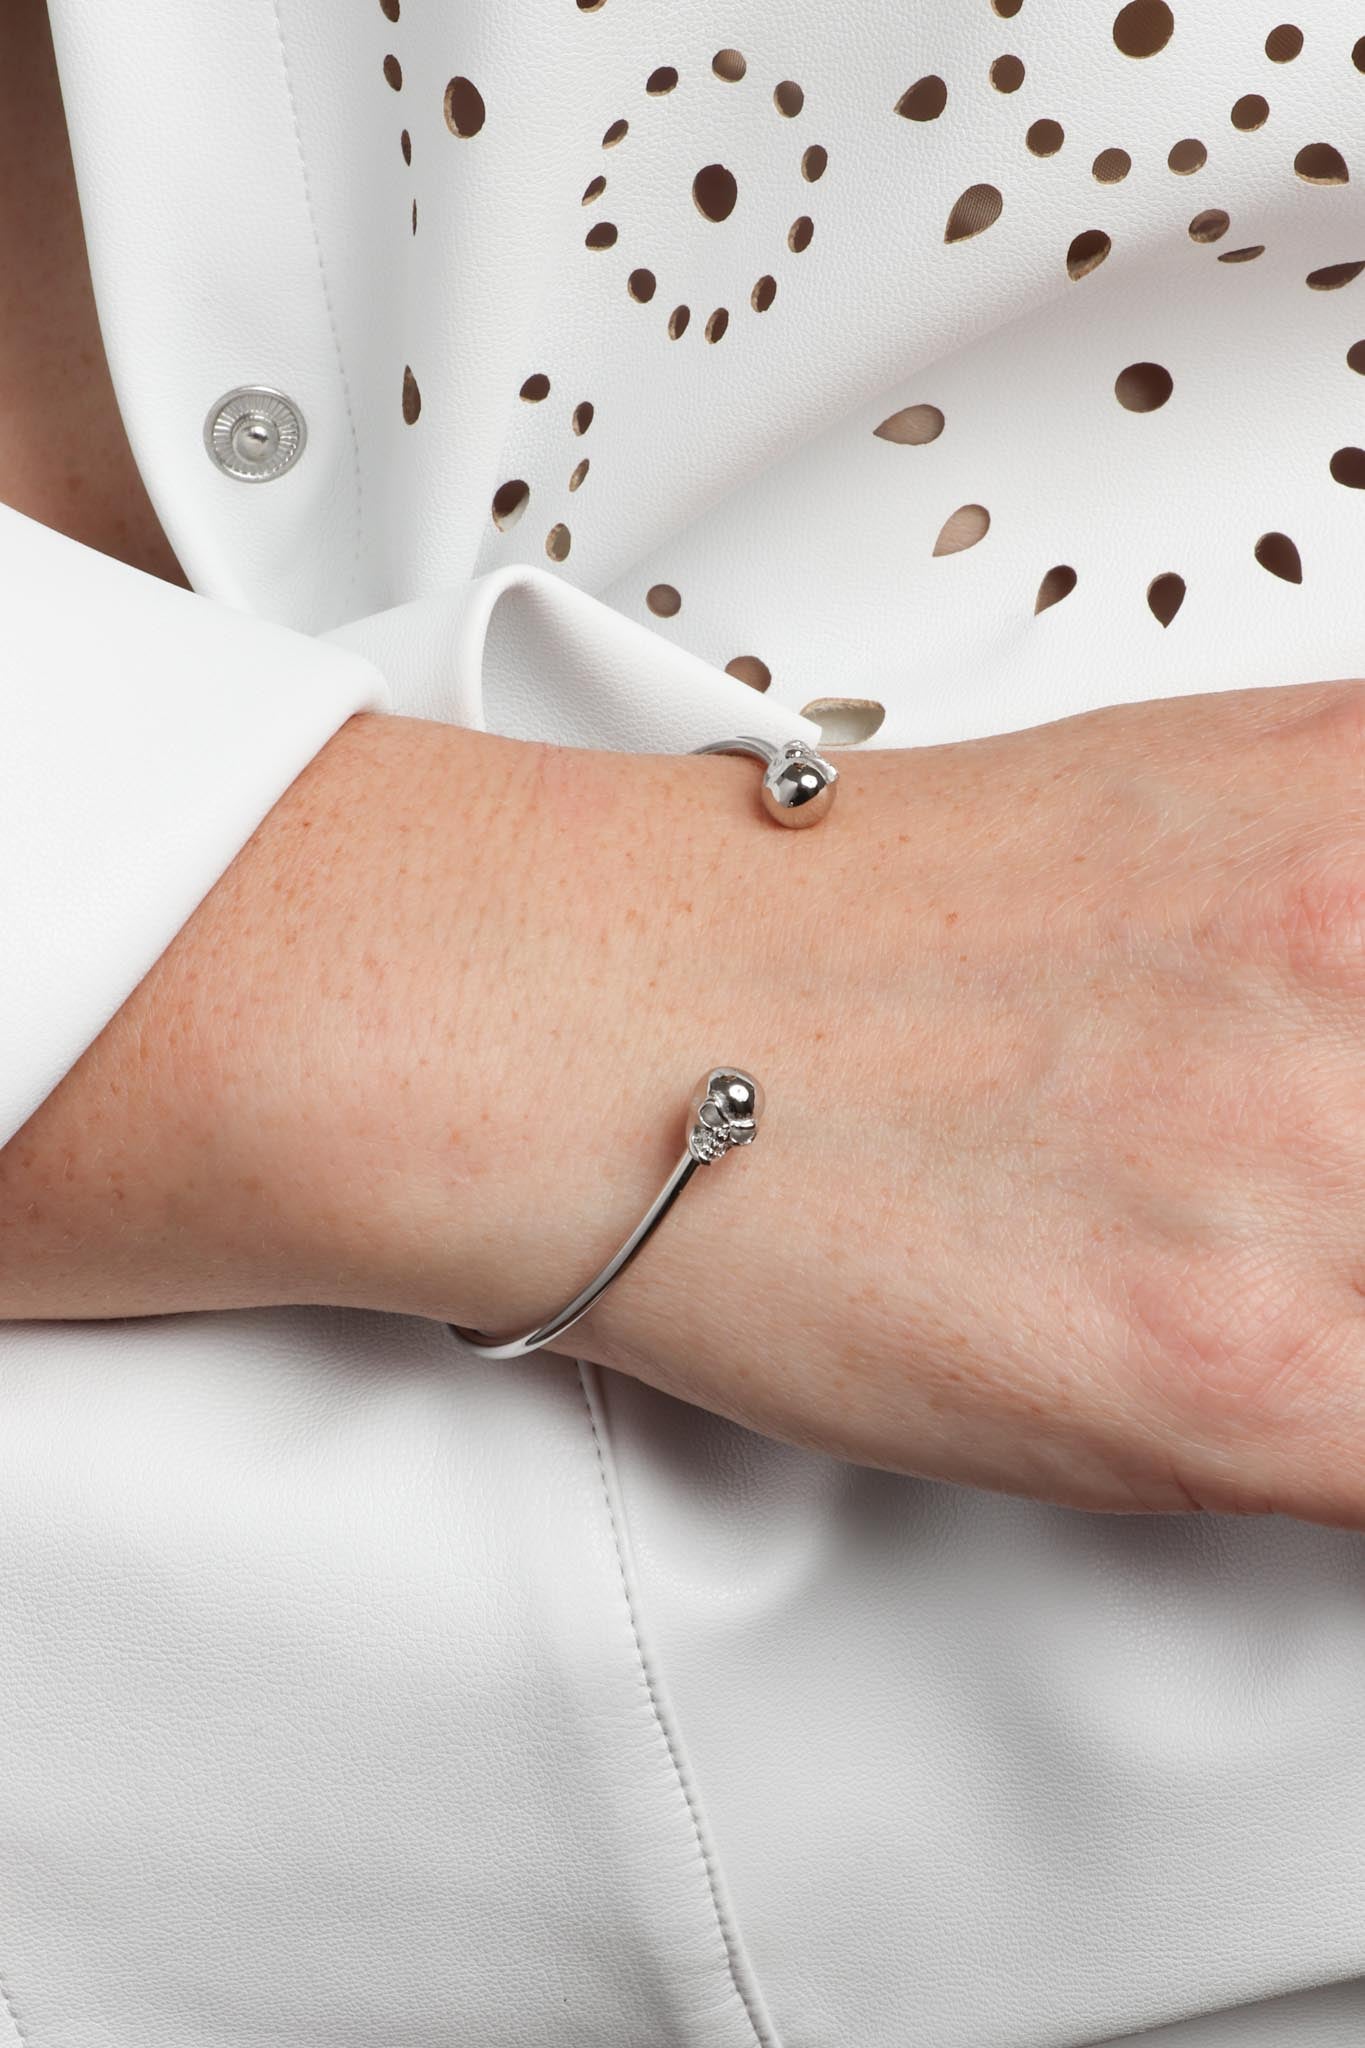 Marrin Costello wearing Marrin Costello Jewelry Hyde Cuff skull adjustable bracelet with cuff bracelet opening. Waterproof, sustainable, hypoallergenic. Polished stainless steel.